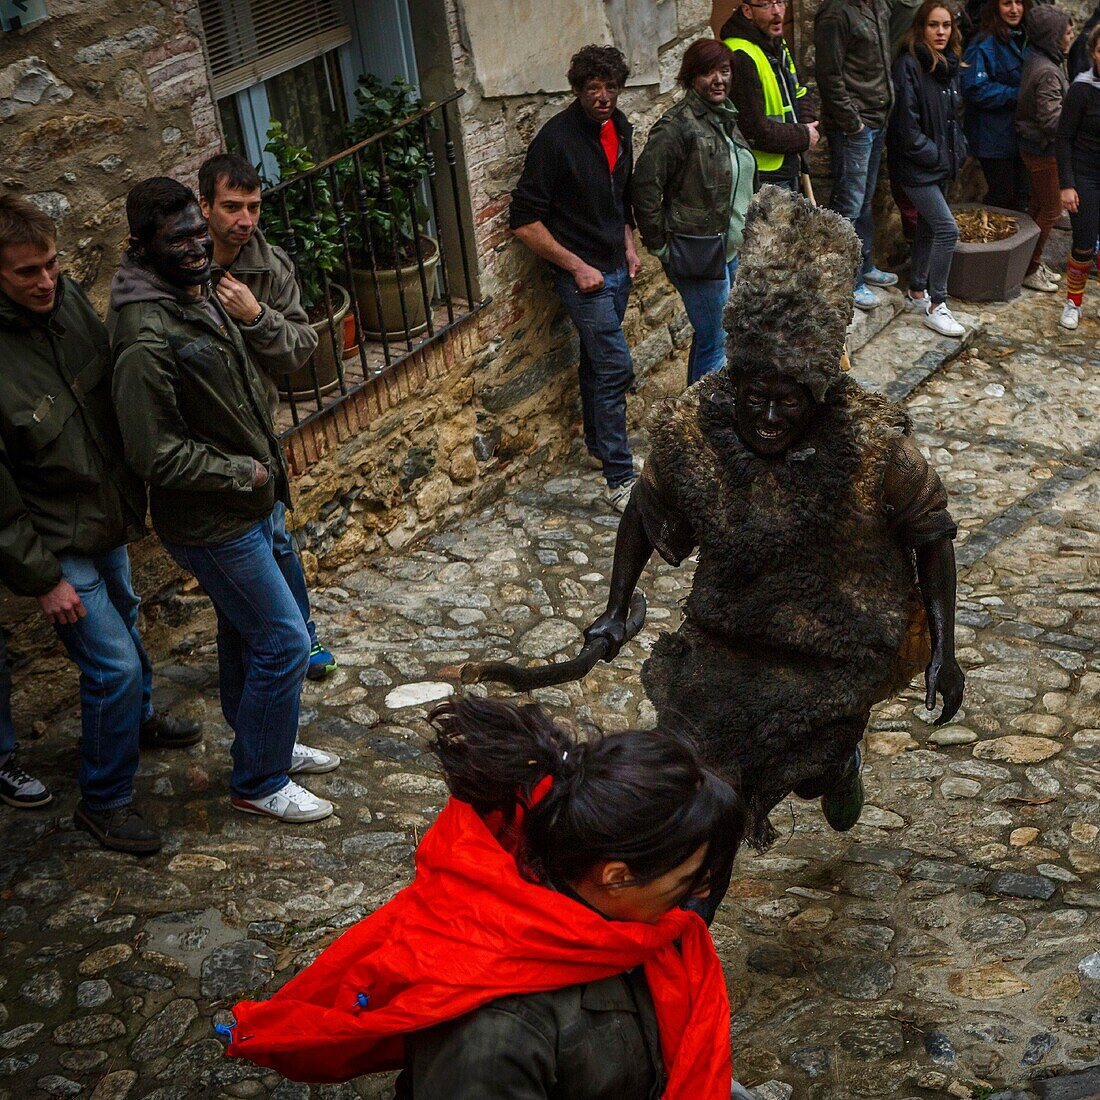 France, Pyrenees Orientales, Prats-de-Mollo, life scene during the bear celebrations at the carnival